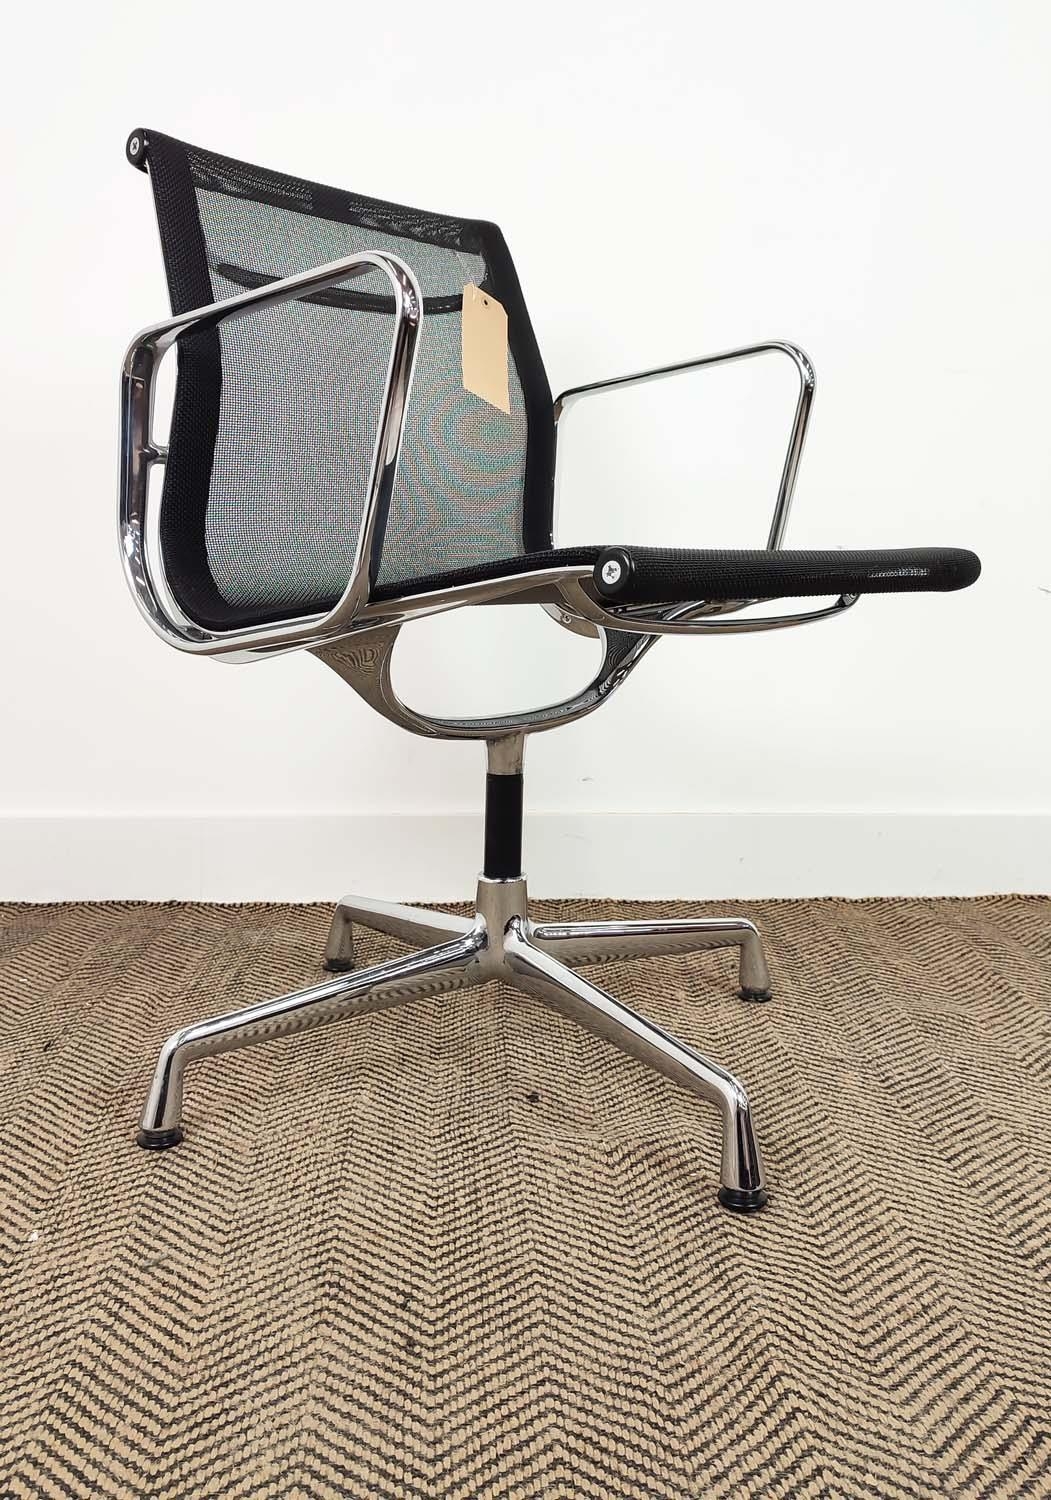 VITRA ALUMINIUM GROUP CHAIR, designed by Charles and Ray Eames, 57cm W x 85cm H, bears label. - Image 2 of 6